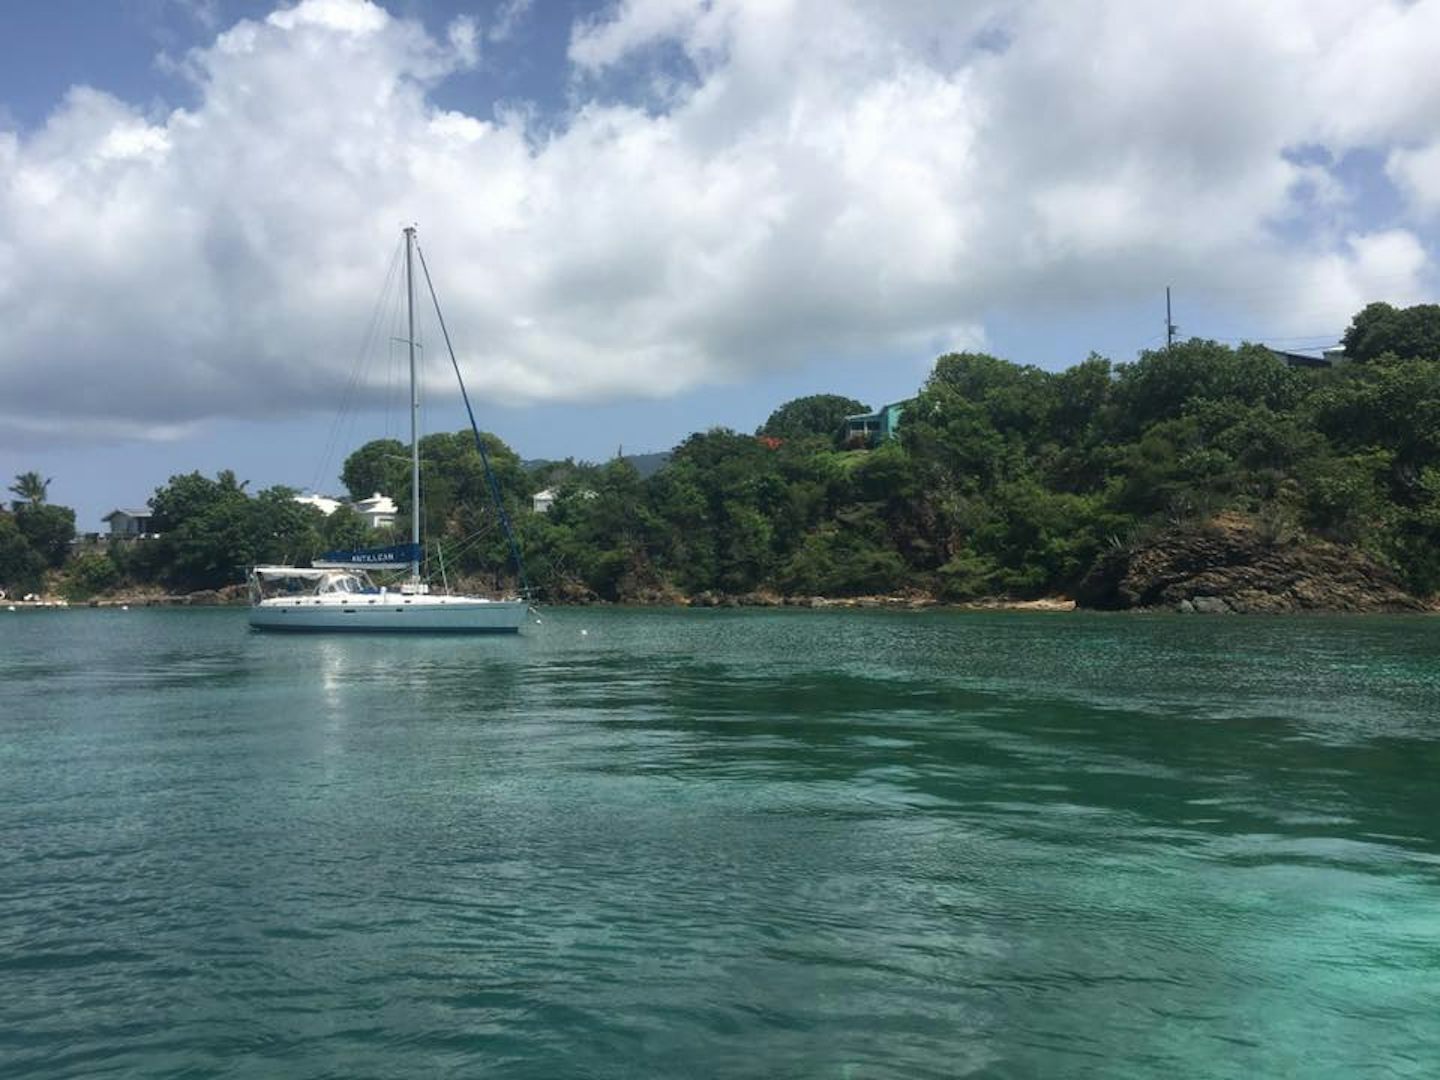 On St. Thomas, we took the fast cat out to see the sea turtles and other tr